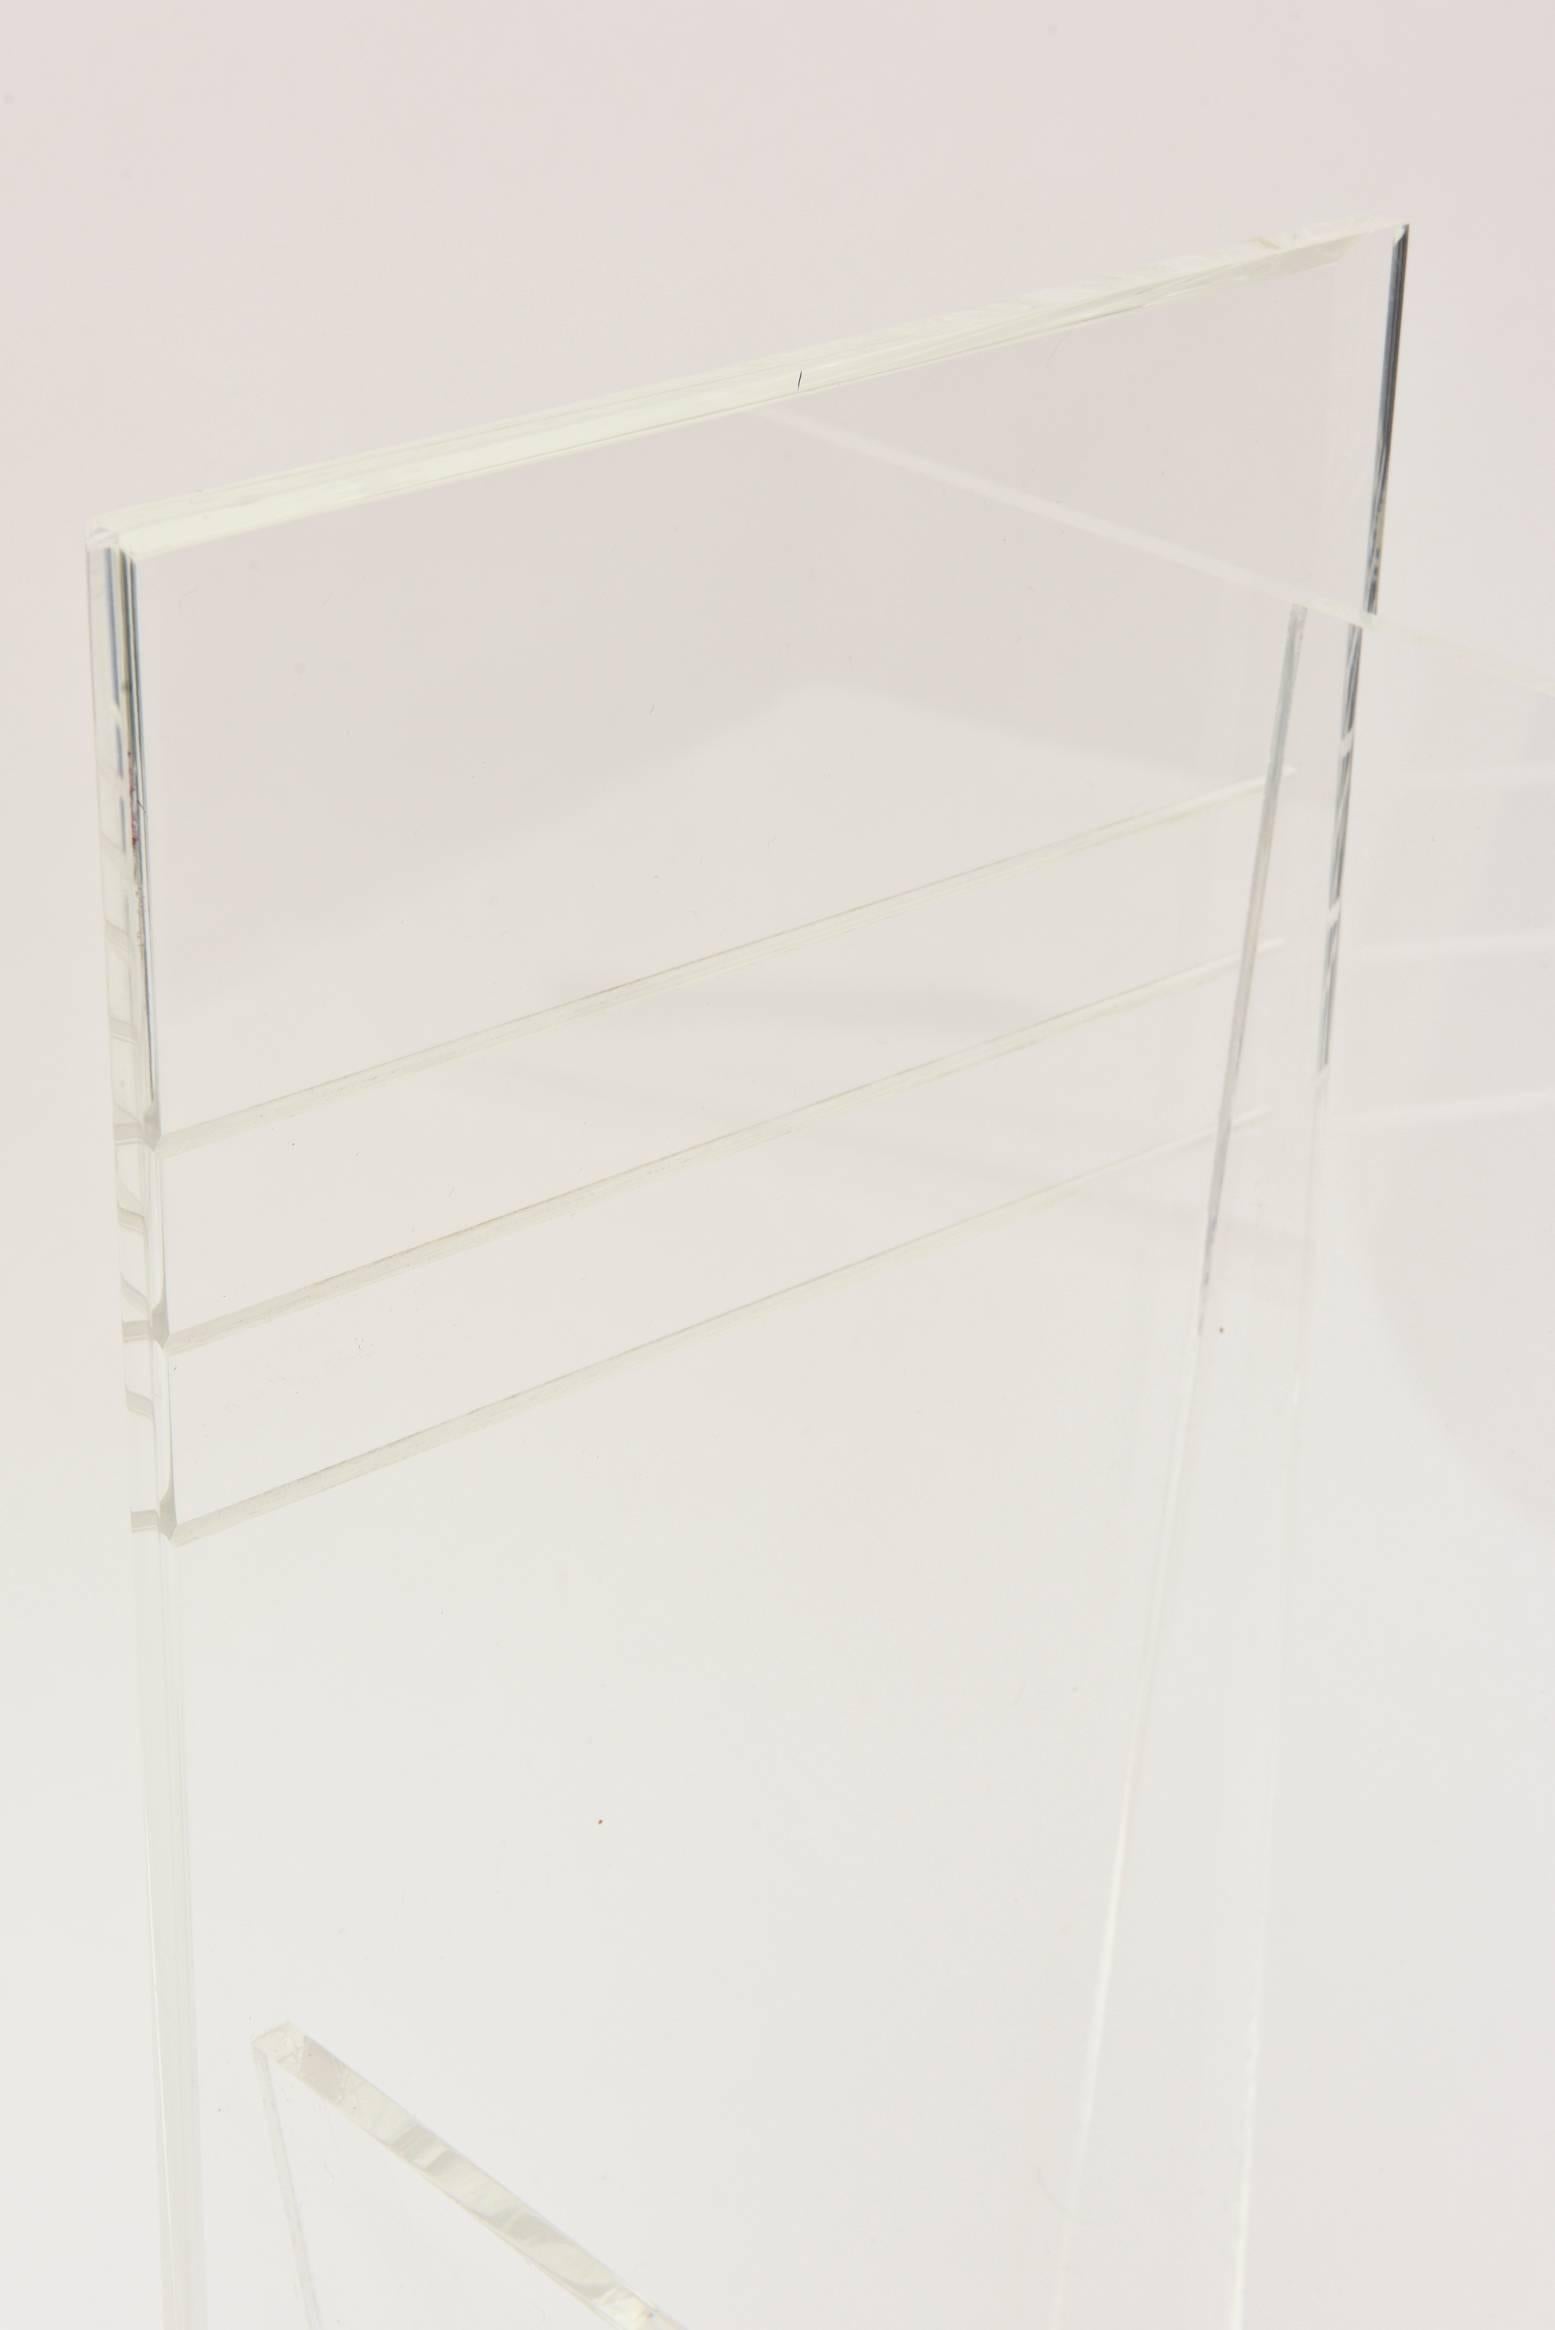 American Lucite Magazine Stand or Rack Vintage